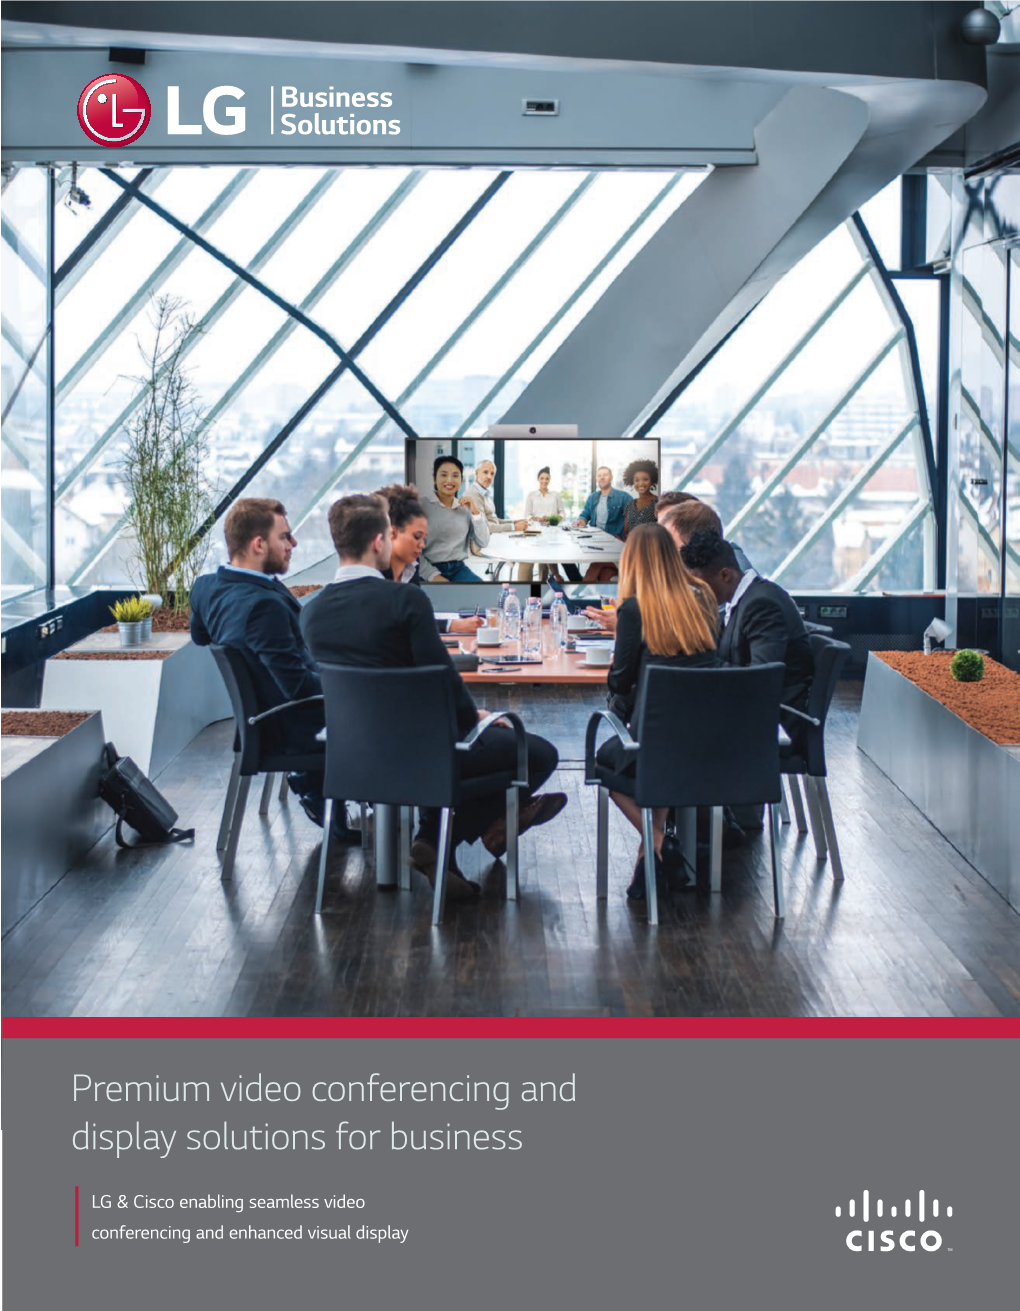 Premium Video Conferencing and Display Solutions for Business